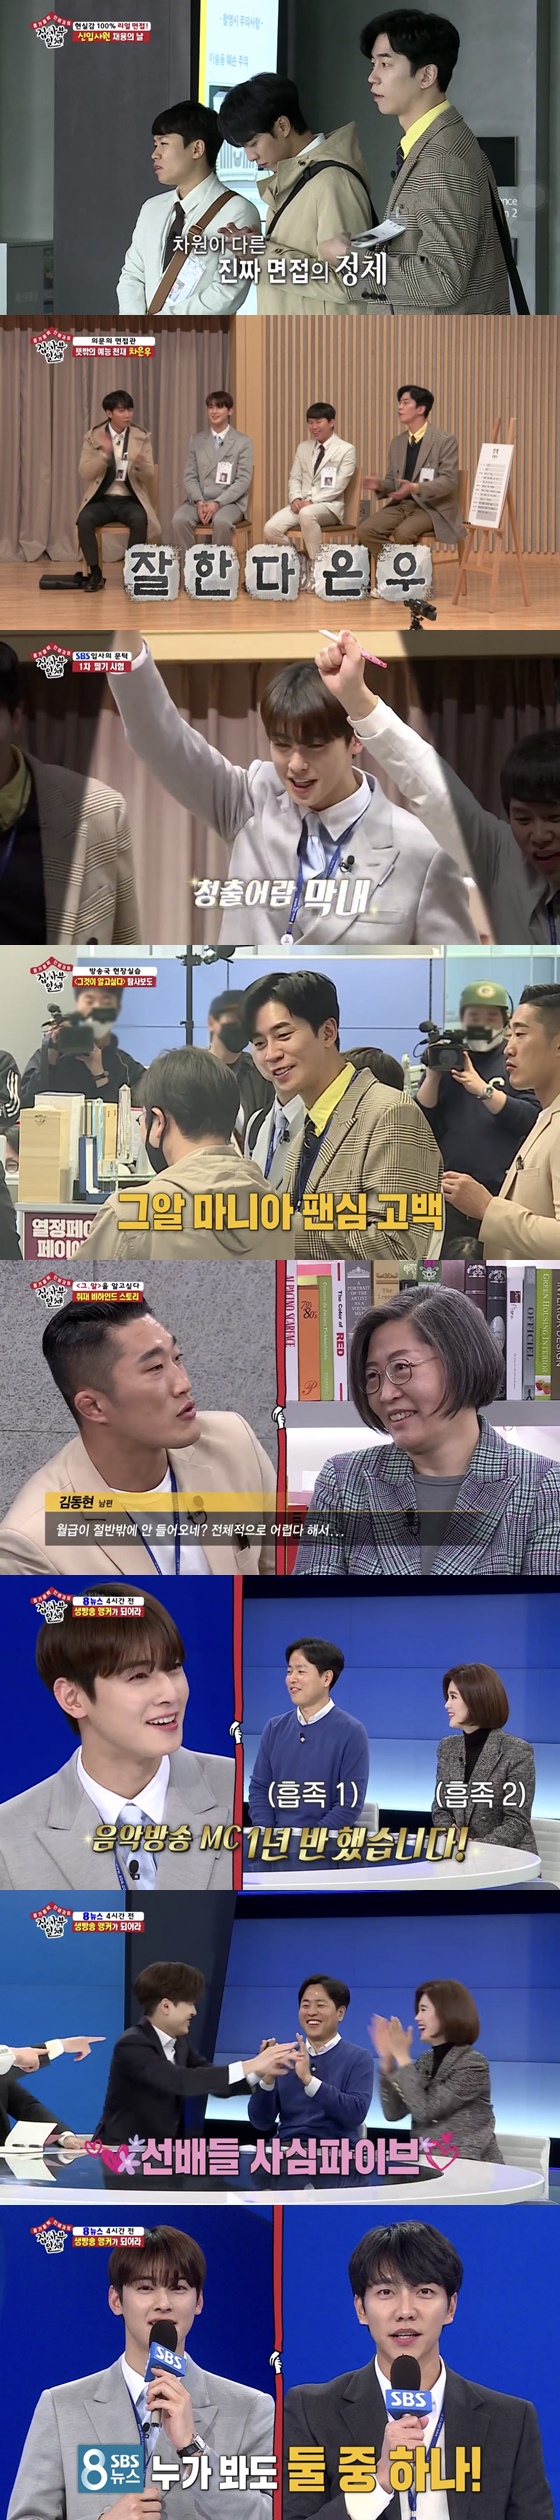 All The Butlers members top Model on SBS Super RookieSBS entertainment All The Butlers broadcasted on the 19th was featured on SBS Super Rookie Recruitment Day.On that day, Yang Se-hyeong brought an honorary employee ID card to SBS, but was dissatisfied because he was not allowed in.Today will be a real formal interview. Yang Se-hyeong, Lee Seung-gi and Shin Sung-rok then entered the interview; self-introduction began with Yang Se-hyeong.Yang Se-hyeong suspected of being a professional interviewer because he said, I do not think the sense of speaking is normal.However, the interviewer cut off Yang Se-hyeong and asked Lee Seung-gi and Shin Sung-rok to introduce themselves for one minute.Shin Sung-rok said, What will you take to the uninhabited island? He replied, I will take my smartphone and make one person content.The interviewers identity was Cha Eun-woo, who said: Its so handsome in real life, its really handsome.Youre a good horse, Yang Se-hyeong said, adding, You should have ripped out the blind, its just a tear.Cha Eun-woo attracted attention by introducing All The Butlers as an English language, saying that it can speak English language, Japanese and Chinese.When Yang Se-hyeong asked, What are the disadvantages? Cha Eun-woo replied, I want to be fun like my brother.Yang Se-hyeong said, Now I even feed quietly.Cha Eun-woo was impressed by the fact that he had done his best in the top three schools and the student president when he studied well.The contents of the internship were It wants to know production, 8 oclock news production, and interview with the head of the entertainment department.At that time, the Todays The International Kim Dong-Hyun appeared, and Kim Dong-Hyun said, I came in suddenly because I was afraid to go when I came in together.Super Rookie benefits were laptops, cell phones, rice and celebratory wreaths.The members fell into a menbung when they saw the actual issue of the written test. The crew suggested that they would pass the problem if they first met the problem.Lee Seung-gi passed first, followed by Cha Eun-woo, Shin Sung-rok, Yang Se-hyeong and Kim Dong-Hyun.Then, the station field practice was conducted. The first place I was headed was the office of It wants to know.Shin Sung-rok, who said that he was a fan of It wants to know, showed his excitement by saying, It seems to be an entertainer by watching Bae Jung-hoon PD.The first session of the exercise was a series of TV networks, which were all over the place.Shin Sung-rok also took the lead in an interview with criminal psychologist Professor This set as a shooting assistant.I had a real question: Did you ever get caught on camera when you were covering scary people? asked Cha Eun-woo.So Bae Jung-hoon PD said, Everyone can be there once or twice, but I have hidden the original shot in my underwear.Other members then moved to see Professor This set, who said: I was so fancied.Did not you be selected by the BBC last year as the 100 Women of the Year?Professor This set said, It seems to have nothing to do with I want to know.Lee Seung-gi asked, How long have you always been asking for advice? And This set replied, I think its been about 20 years.Lee Seung-gi added, Is not this set professor the first senior?Professor This set says, There comes a quality person, and these people really send me Ry, not the means and methods.Ry is not an important issue, said PD. I think youre misunderstood, but were giving you Ry, and This set said, I started receiving it recently.I did not receive it for about 10 years, he said. I will work hard because I give it to the gum. Lee Seung-gi also asked, I dont think my husband will lie, I think hell be caught.Professor This set said, We are made up of family members who know that lying is useless.I am only raising the possibility of being discovered because I process information. Kim Dong-Hyun then started the situational drama with This set, which said of Kim Dong-Hyuns performance, Ive already been caught.People who lie become long-winded. I do not have to explain it, but I have already been caught because I explain it. Lee Seung-gi also showed off his acting skills and entered a situational drama where his salary was cut. Professor This set said, Give me the phone.Lee Seung-gi said, The monthly salary has come back?Lee Seung-gi said, Its like a feature of criminals. My pupils shake. I wanted to give you more information because I was anxious.At this time, Cha Eun-woo asked PDs, Is there a dizzying situation that I had while I was in the coverage?Kim Jae-won PD said, I went to the coverage once, and a person who drank a lot hit our camera. I thought my junior would stop me...Professor This set added, The most important thing about It wants to know is that it is talking. The truth of the case is revealed and the US is solved.Another PD said, It is not the true crime of the eighth case of the Mars serial murder. When I write the retrial, the first and second witnesses Ry will be It wants to know.I feel a lot of reward when I do, he said.Professor This set said, I started when I was a black head and now I have a white head. I think I can help you until my head is whiter.The members of All The Butlers then moved to Jo Jeong-sik announcer and SBS 8 News Press; the members were joined as part of the live broadcast.Jo Jeong-sik introduced the Hyun Woo Anchor and said, In The Incarnation of Jealousy, Mr. Cho is the real model of Mr. Cho Jeong-seok; and he actually married Lee An-jin, a weathercaster.Jo Jin-sik also introduced Choi Hye-rim Anchor and added, You joined with Bae Sung-jae, it is the audio of the legend.I feel immersive just by the voice, its really cool, Yang Se-hyeong admired.The members went on an annoyance test, appealing to MC experience, vocalization and reliability; seniors revealed their self-interest by high-five on Cha Eun-woos report.Lee Seung-gis report applauded and said, It was the closest to the news tone.The following was an Anchor quality test: You can memorize this and report it, said Hyun Woo Anchor.Anchors admired Lee Seung-gis perfect reporting.Hyun Woo, Choi Hye-rim Anchor said, It is Lee Seung-gi who will be with us today. He pointed to Cha Eun-woo in radio news and Yang Se-hyeong as backup anchor.Lee Seung-gi and Yang Se-hyeong then went to Kim Yoon Sang announcer who was responsible for sports news.Kim Yoon Sang surprised Lee Seung-gi by saying, Today, I will be doing sports closing instead of me, and I can trust it if it is Mr. Seung-gi.Photo: SBS broadcast screen